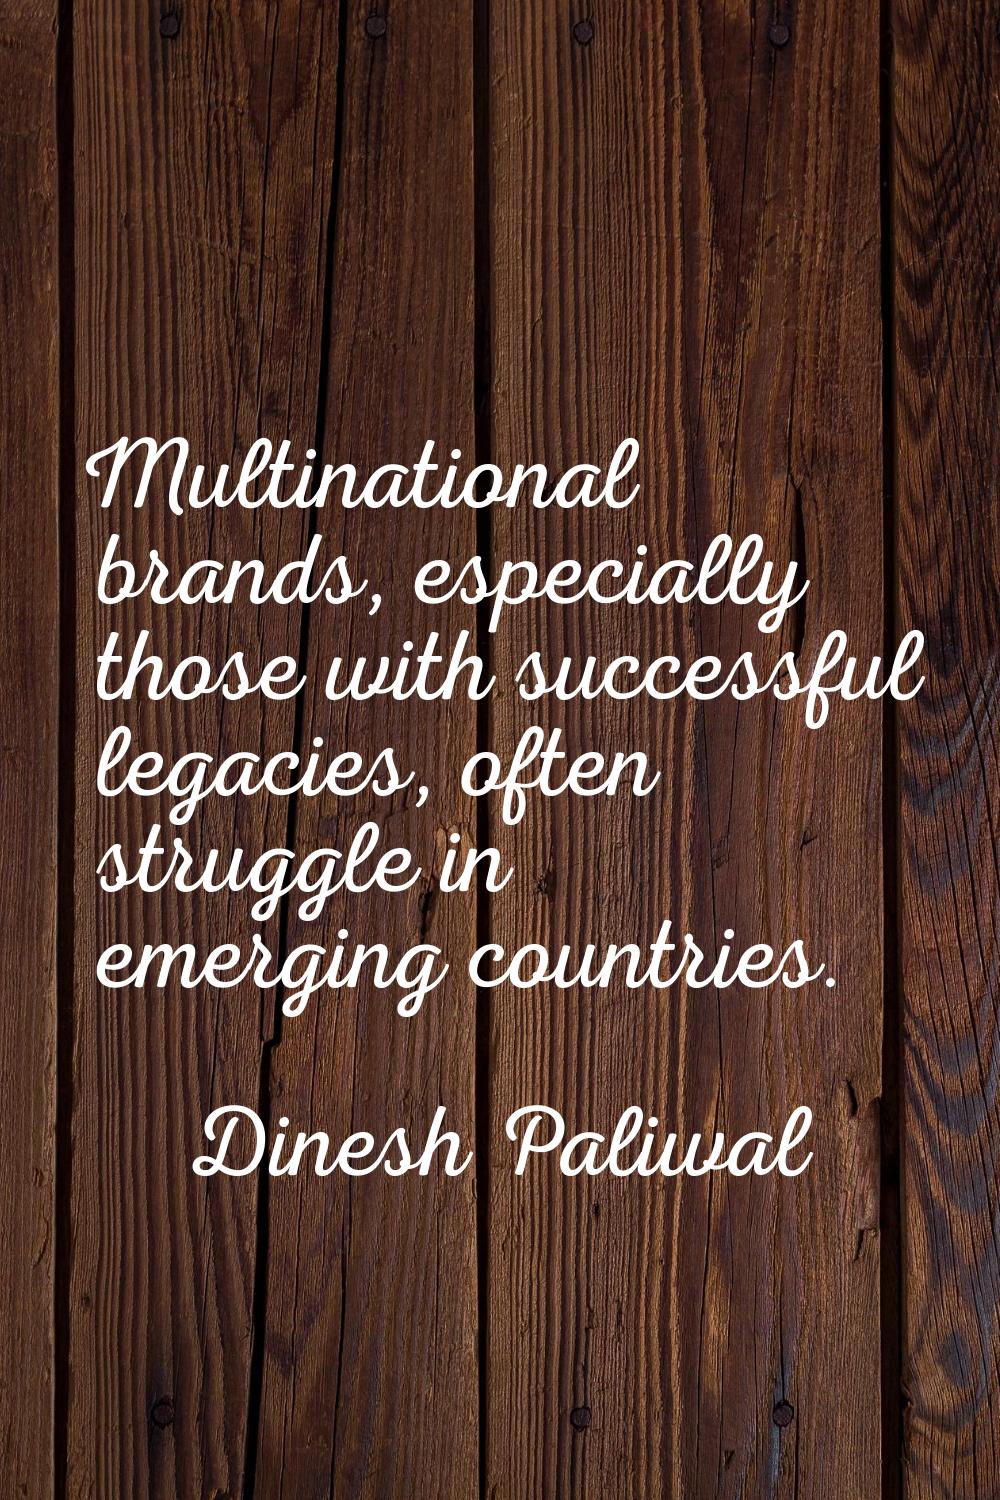 Multinational brands, especially those with successful legacies, often struggle in emerging countri